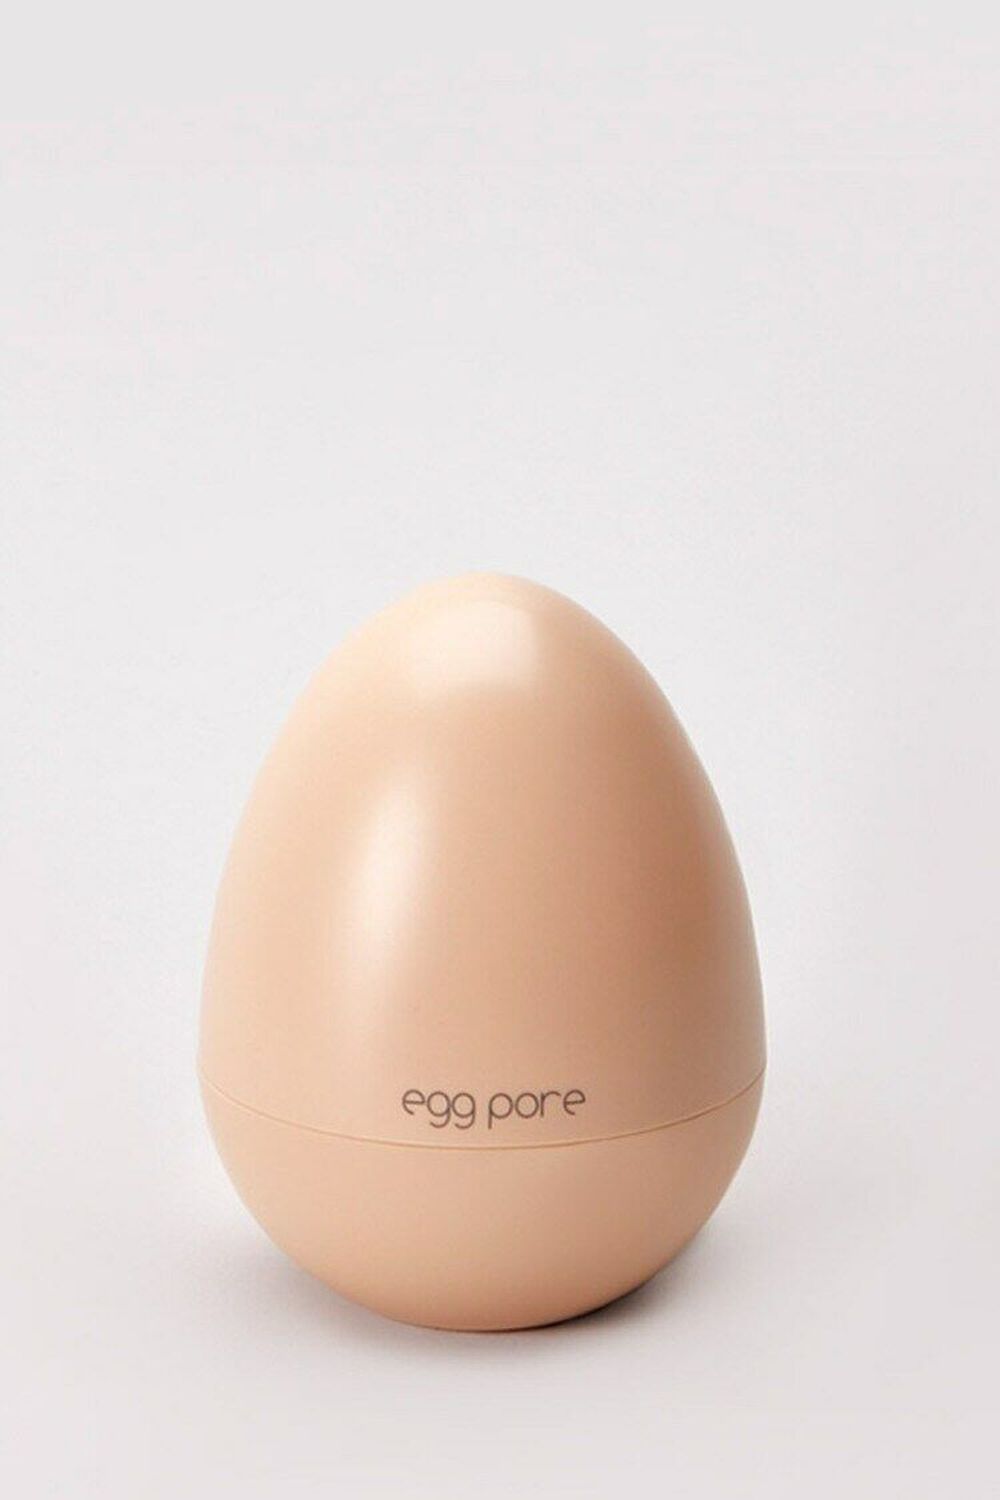 YELLOW Egg Pore Tightening Cooling Pack, image 1